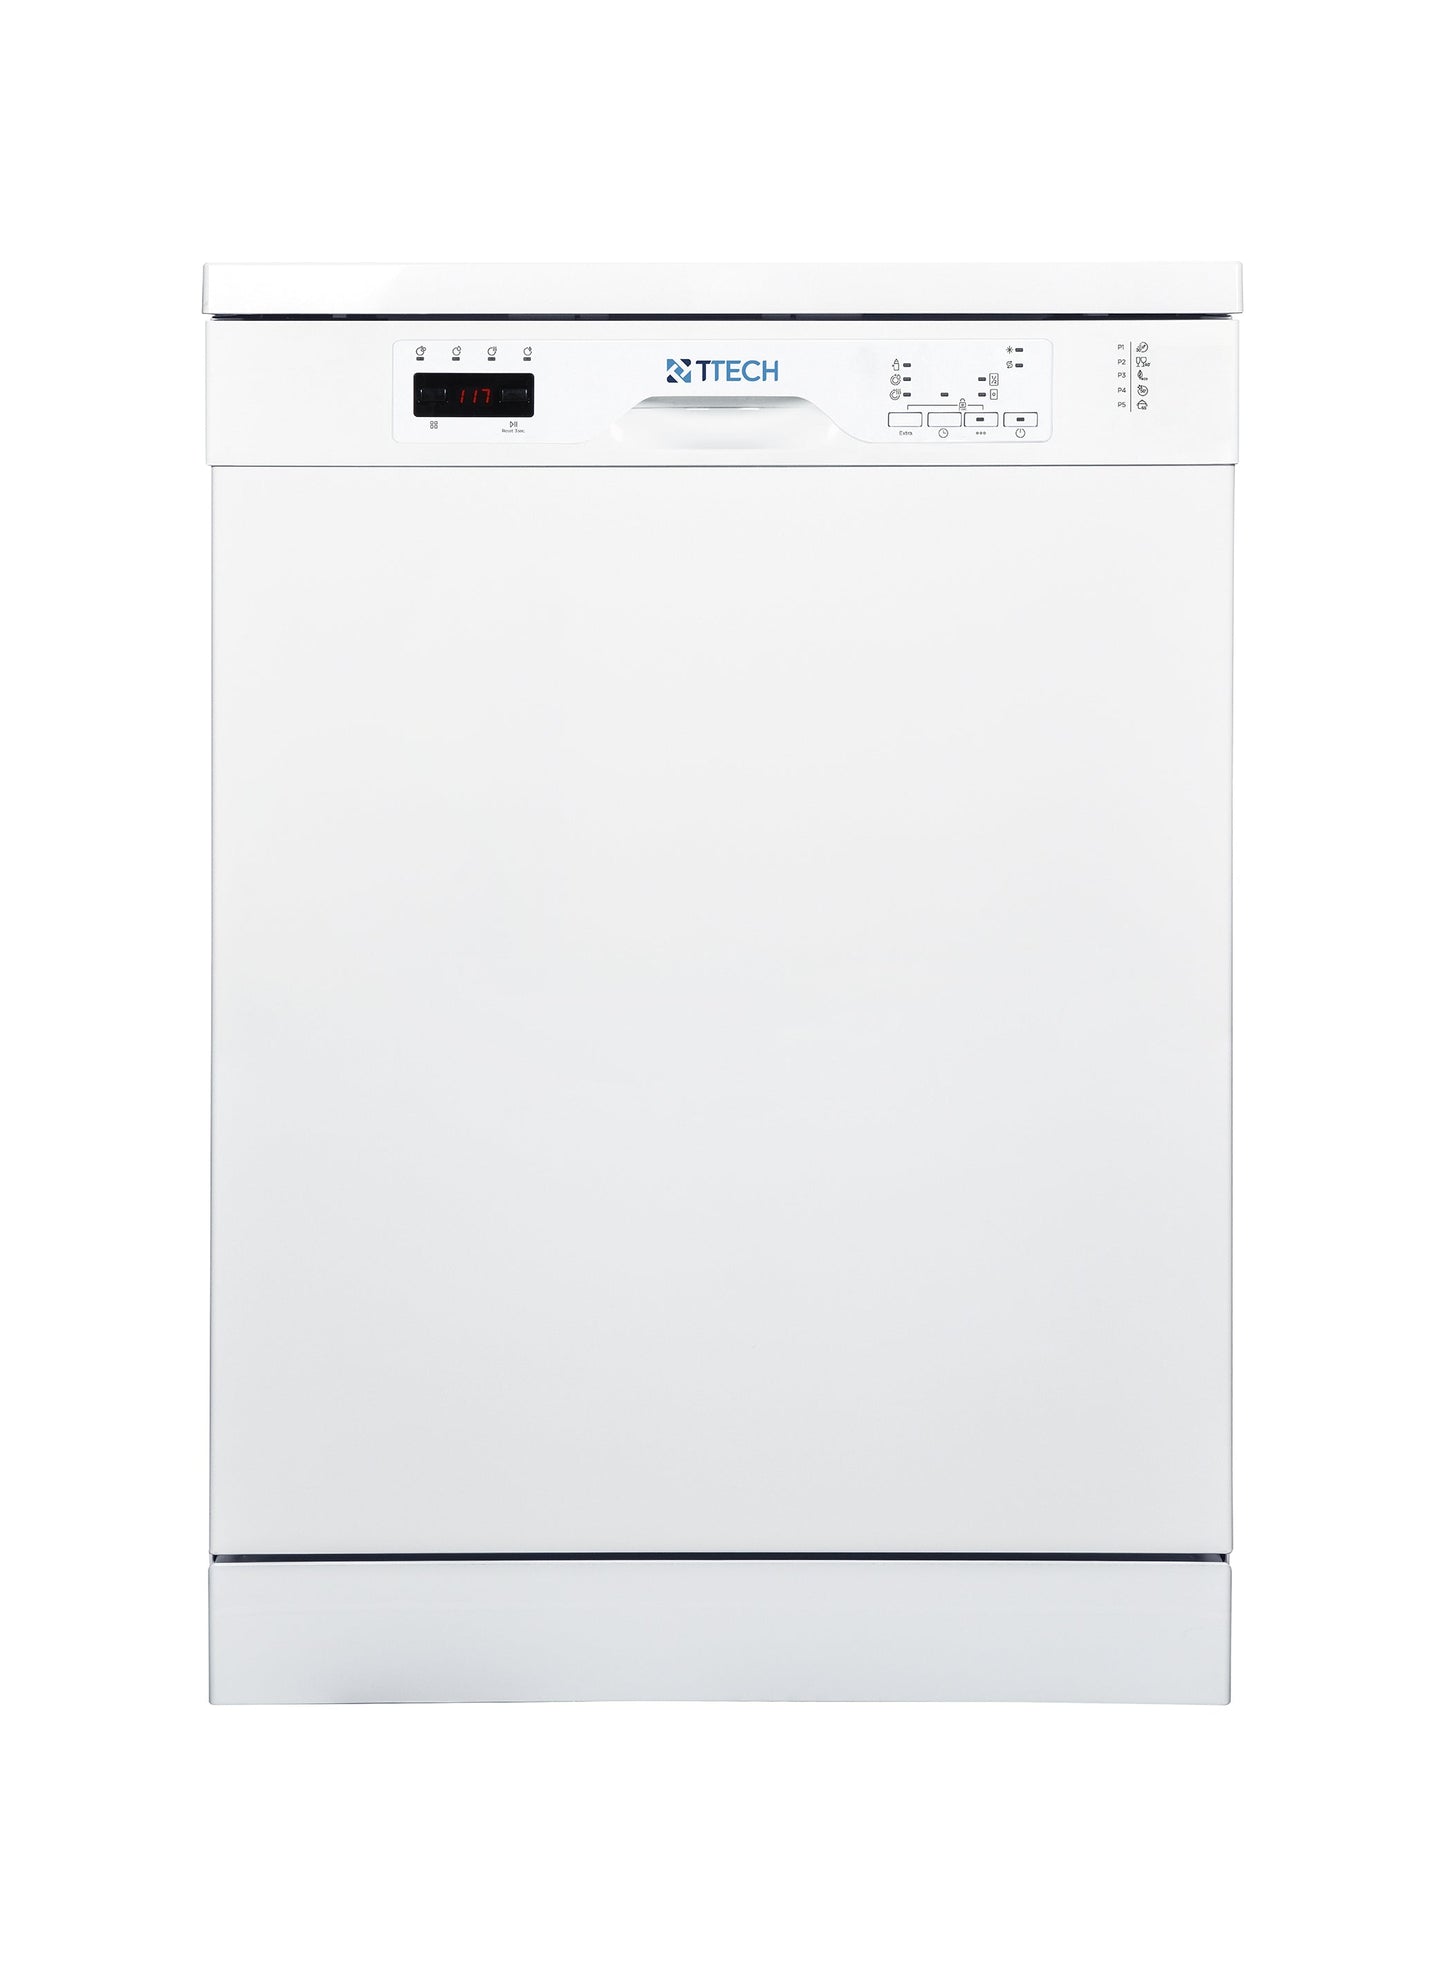 T-TECH Y SERIES F.S DISHWASHER 60 CM, MODEL TT-Y1D/W,  5 PROGRAMS AND 12 PLACE SETTINGS WITH DISPLAY, WHITE COLOR